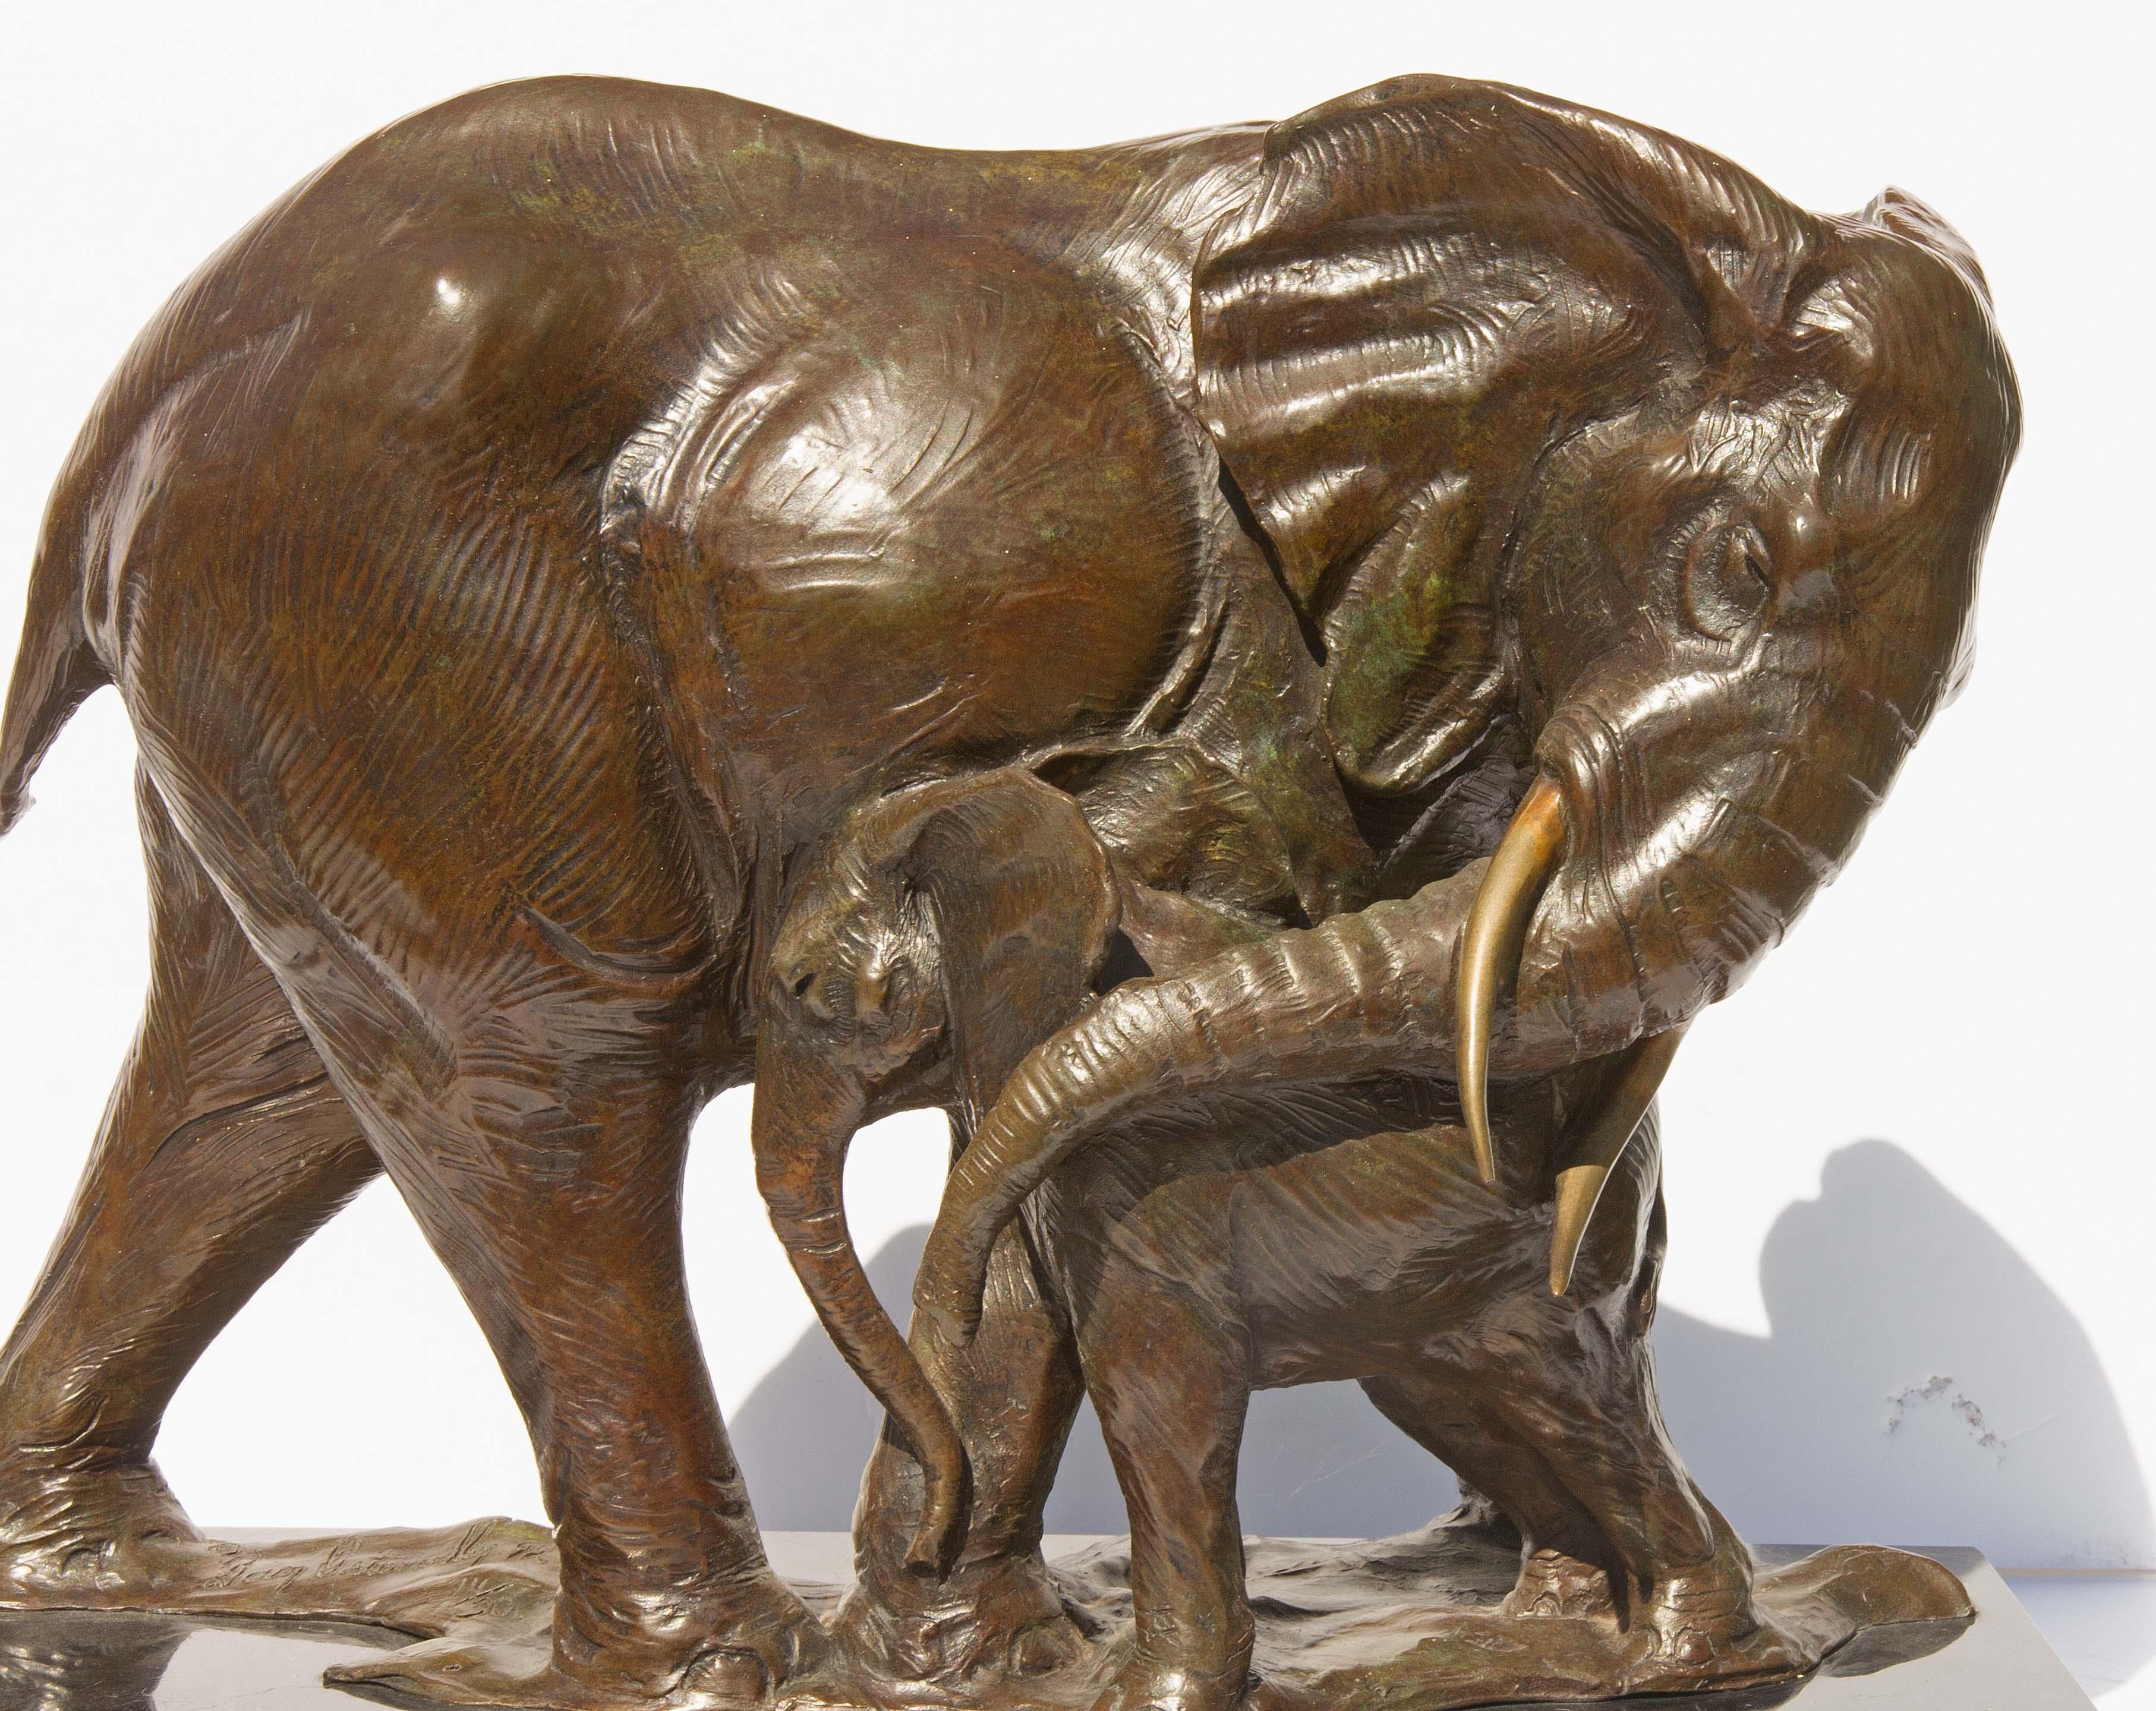 Poignant bronze sculpture of nurturing mother elephant and her calf. Rich brown patina with hints of verdigris. By American sculptor Dan Ostermiller. Signed and dated 1992. Casting number 14 out of 30. Mounted on marble and wood base. 
One of